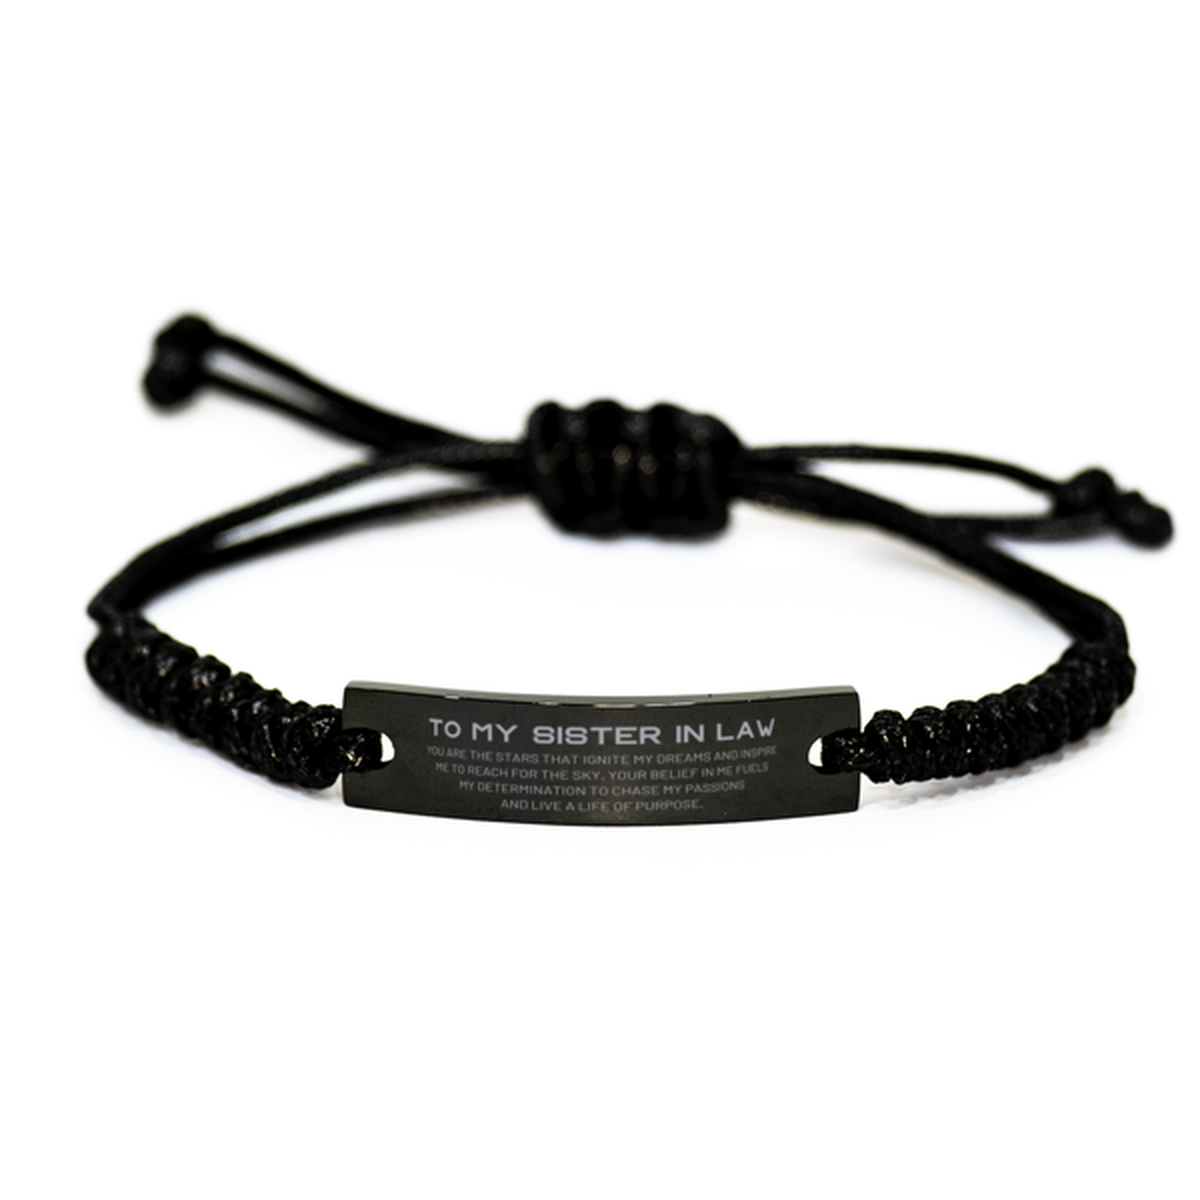 To My Sister In Law Black Rope Bracelet, You are the stars that ignite my dreams and inspire me to reach for the sky, Birthday Unique Gifts For Sister In Law, Thank You Gifts For Sister In Law